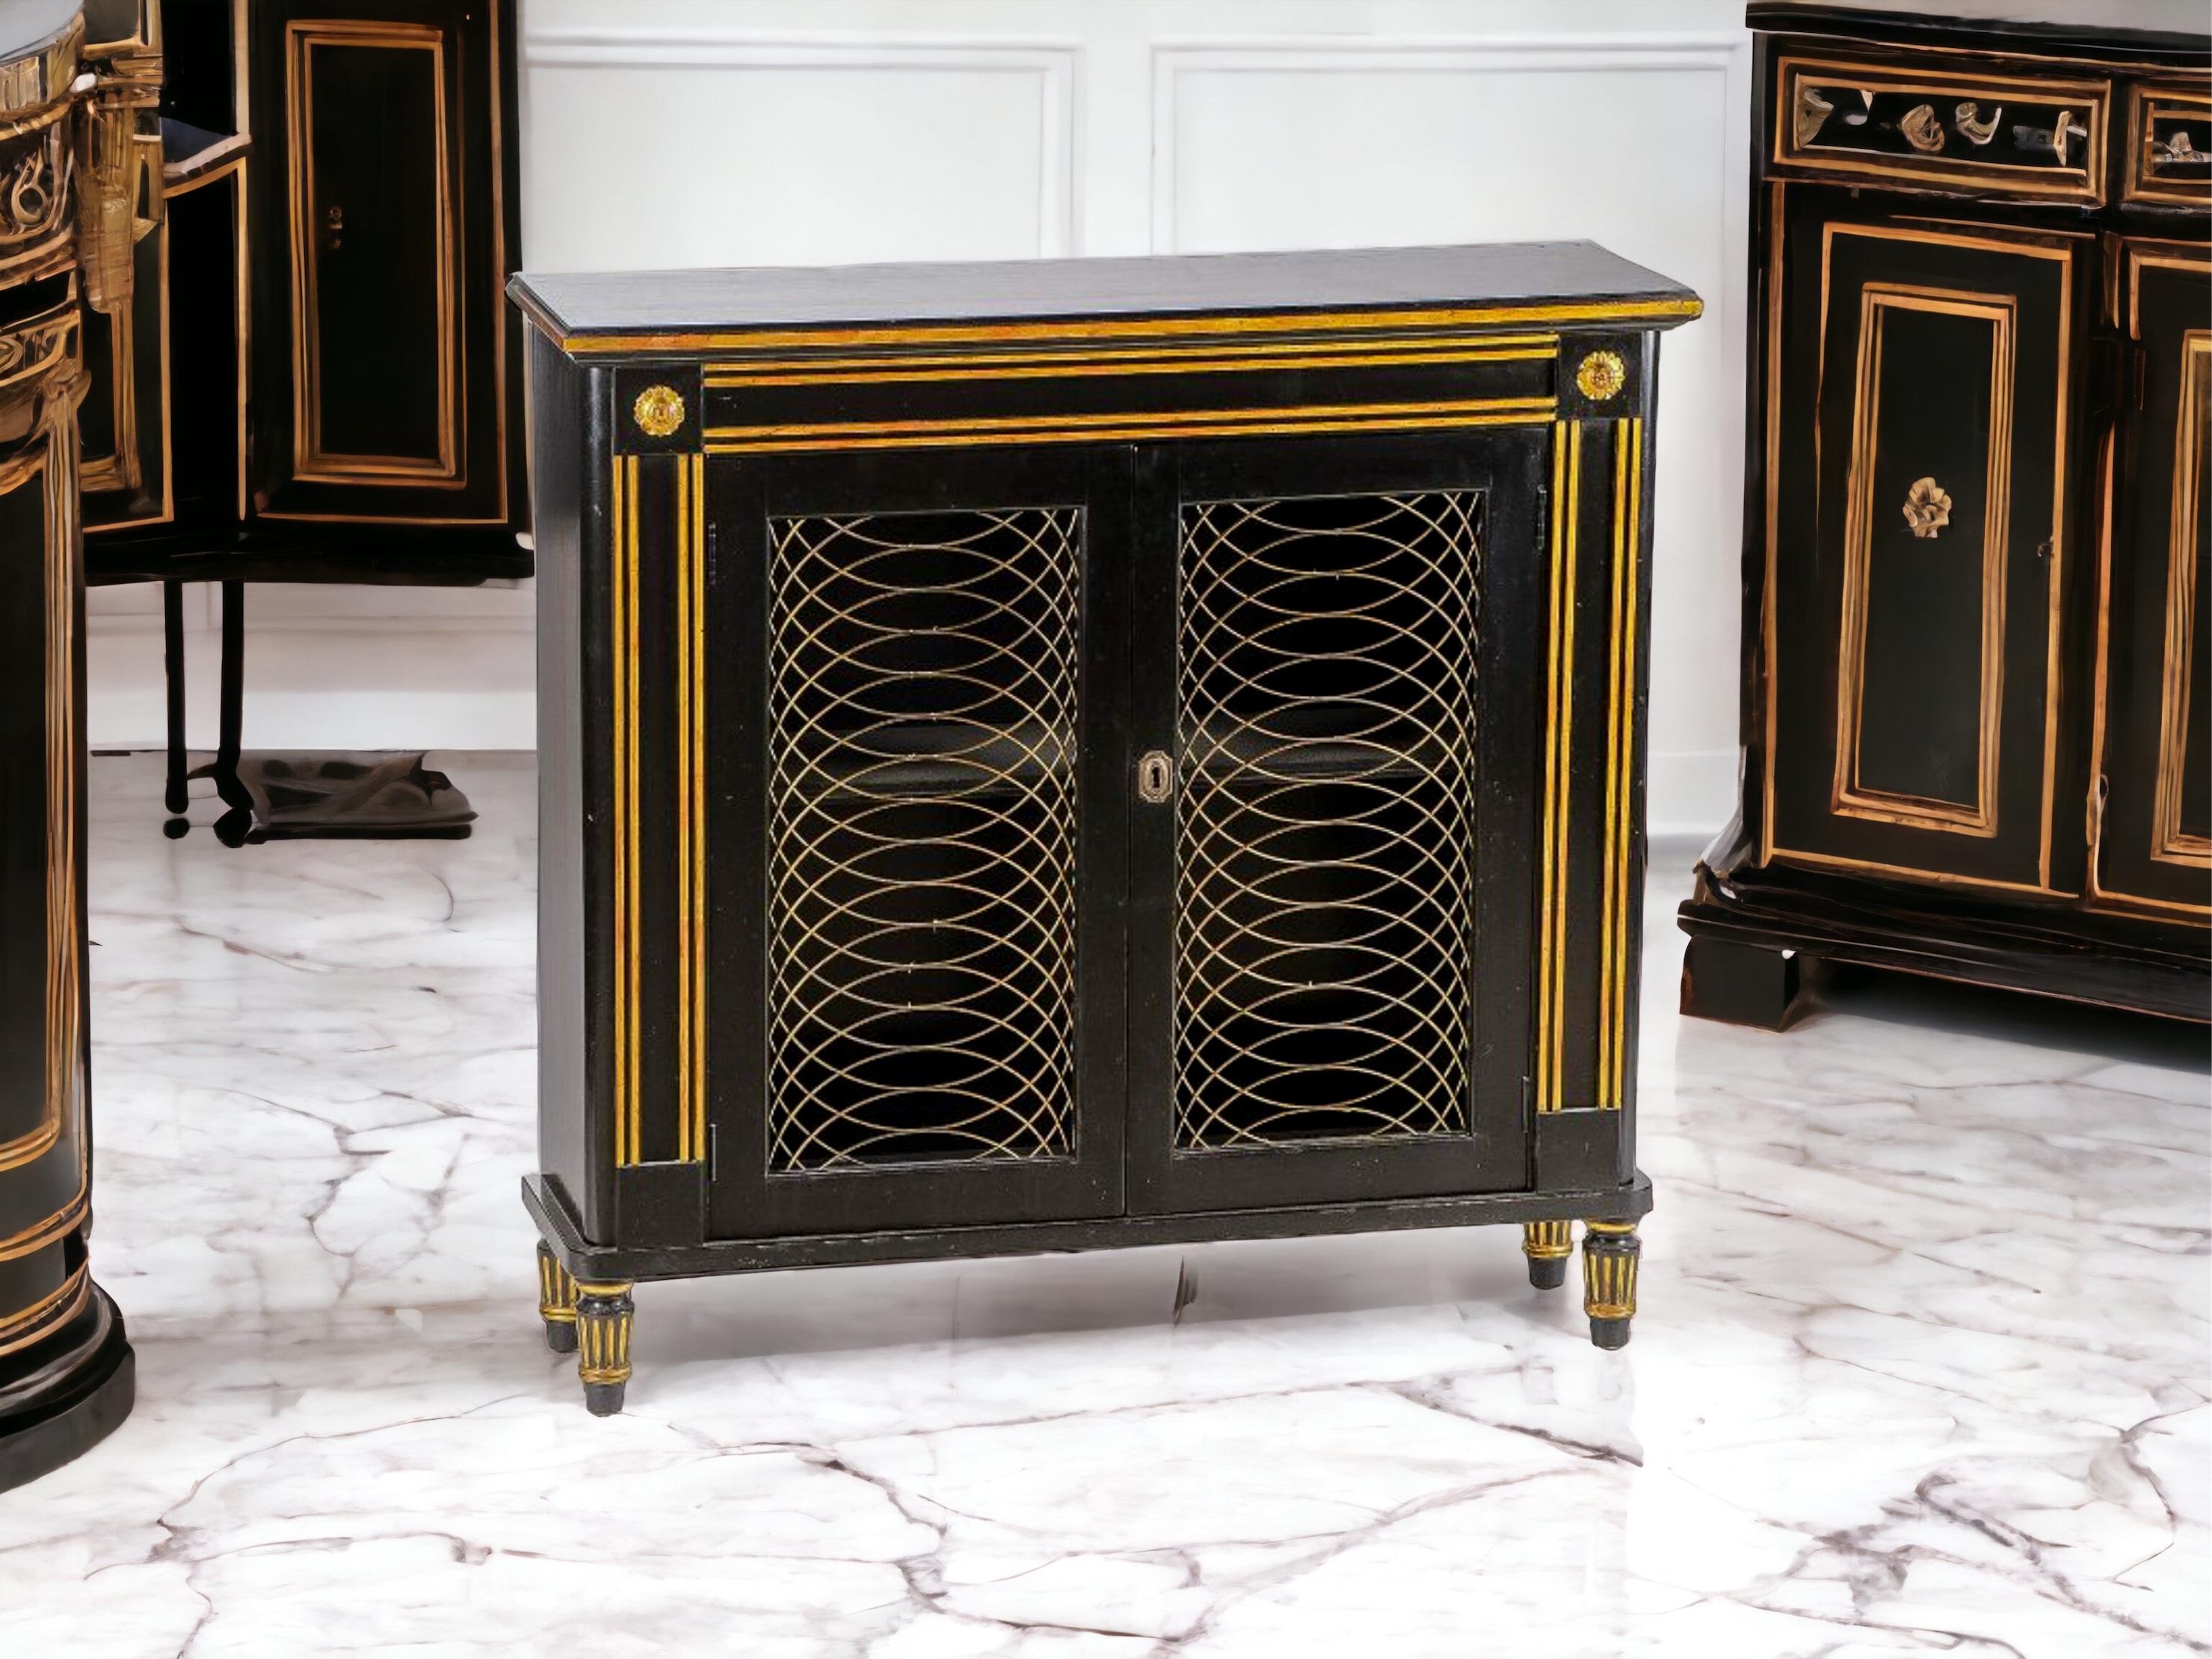 This is a mid-century Regency style Italian cabinet with a painted black lacquer finish and gilt accents. It opens to a single shelf. Note the raised panels and and turned feet! It is unmarked and in very good condition. Perfect for a bathroom!

My